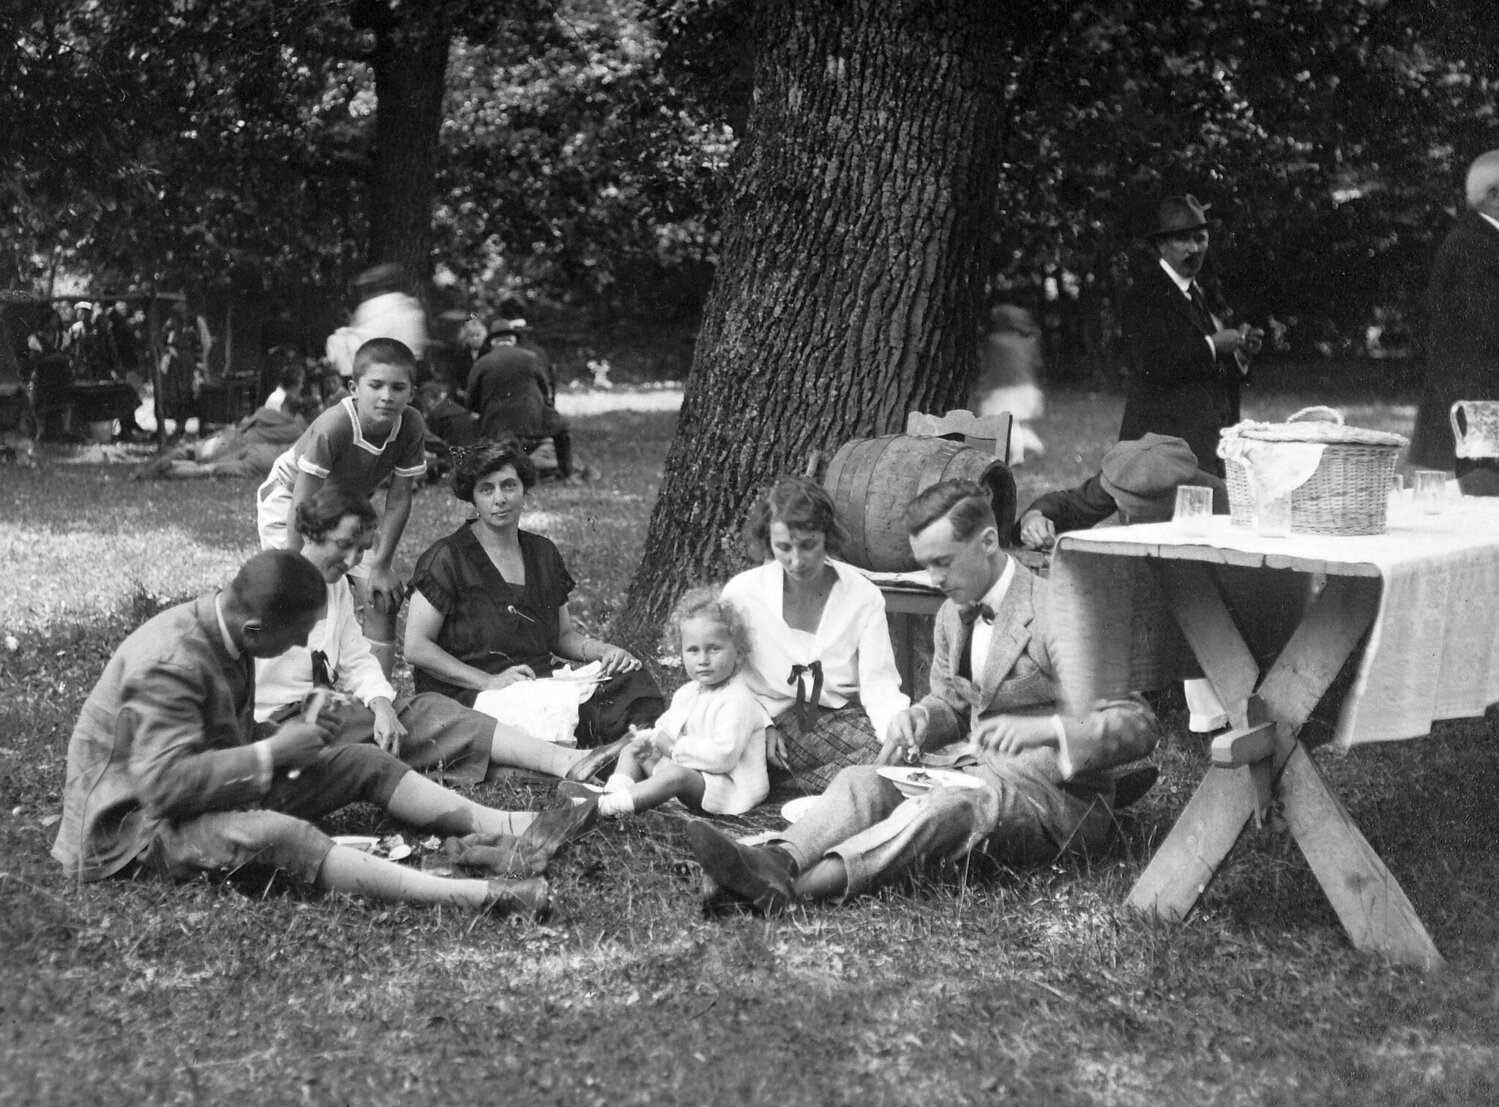 A family in summer. Picnics got you out of the stifling house. License link: creativecommons.org/licenses/by-sa/3.0